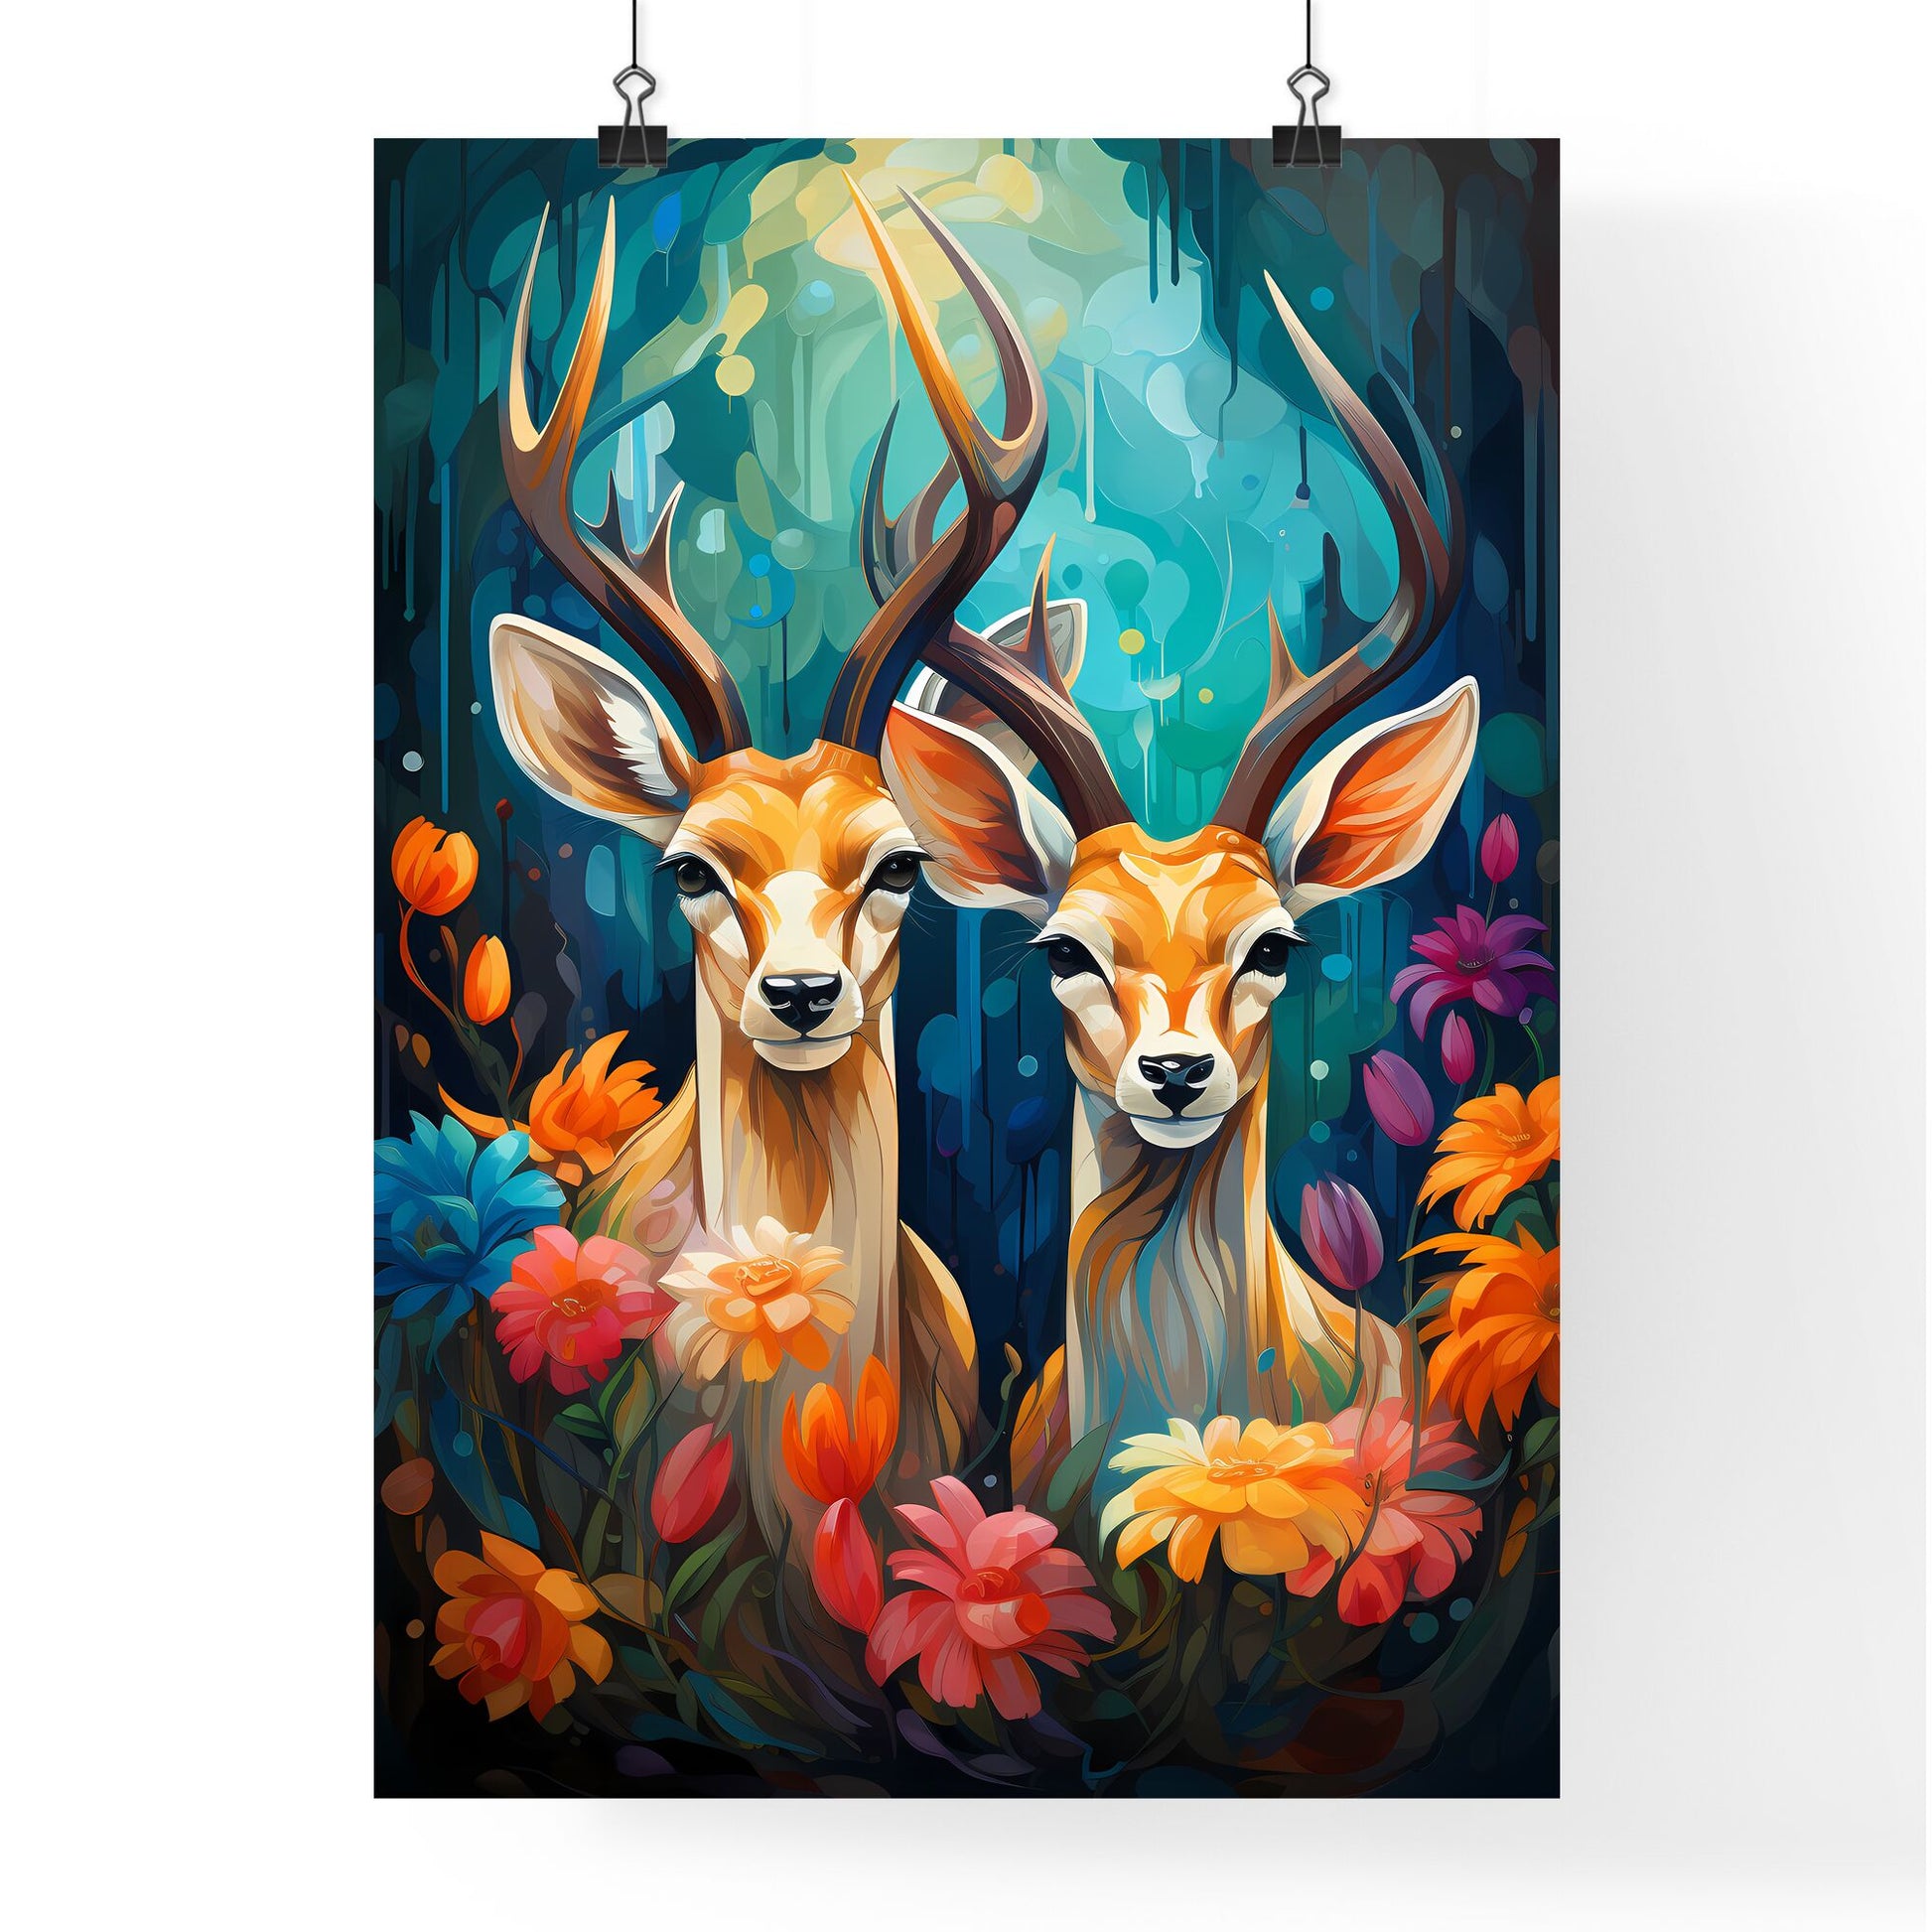 Two Female Lesser Kudu Antelopes - Two Deer With Antlers Surrounded By Flowers Default Title